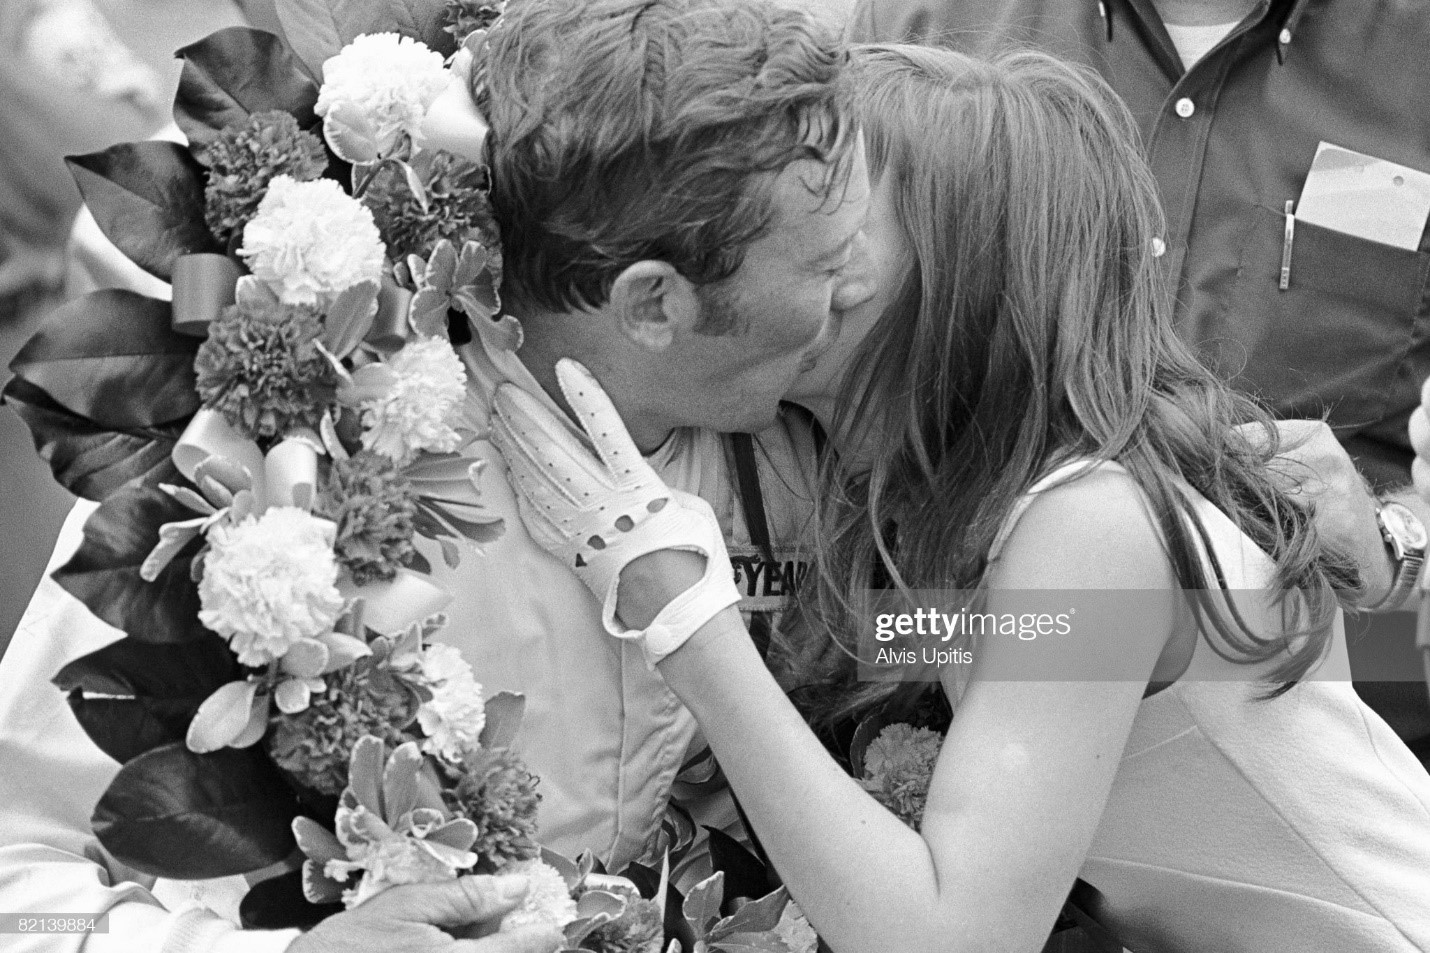 Gary Bettenhausen kisses race queen after winning the USAC Champ Car race as part of the unusual Twin Bill for stock and open wheel racers on July 4, 1970 at Michigan International Raceway in Brooklyn, Michigan. 